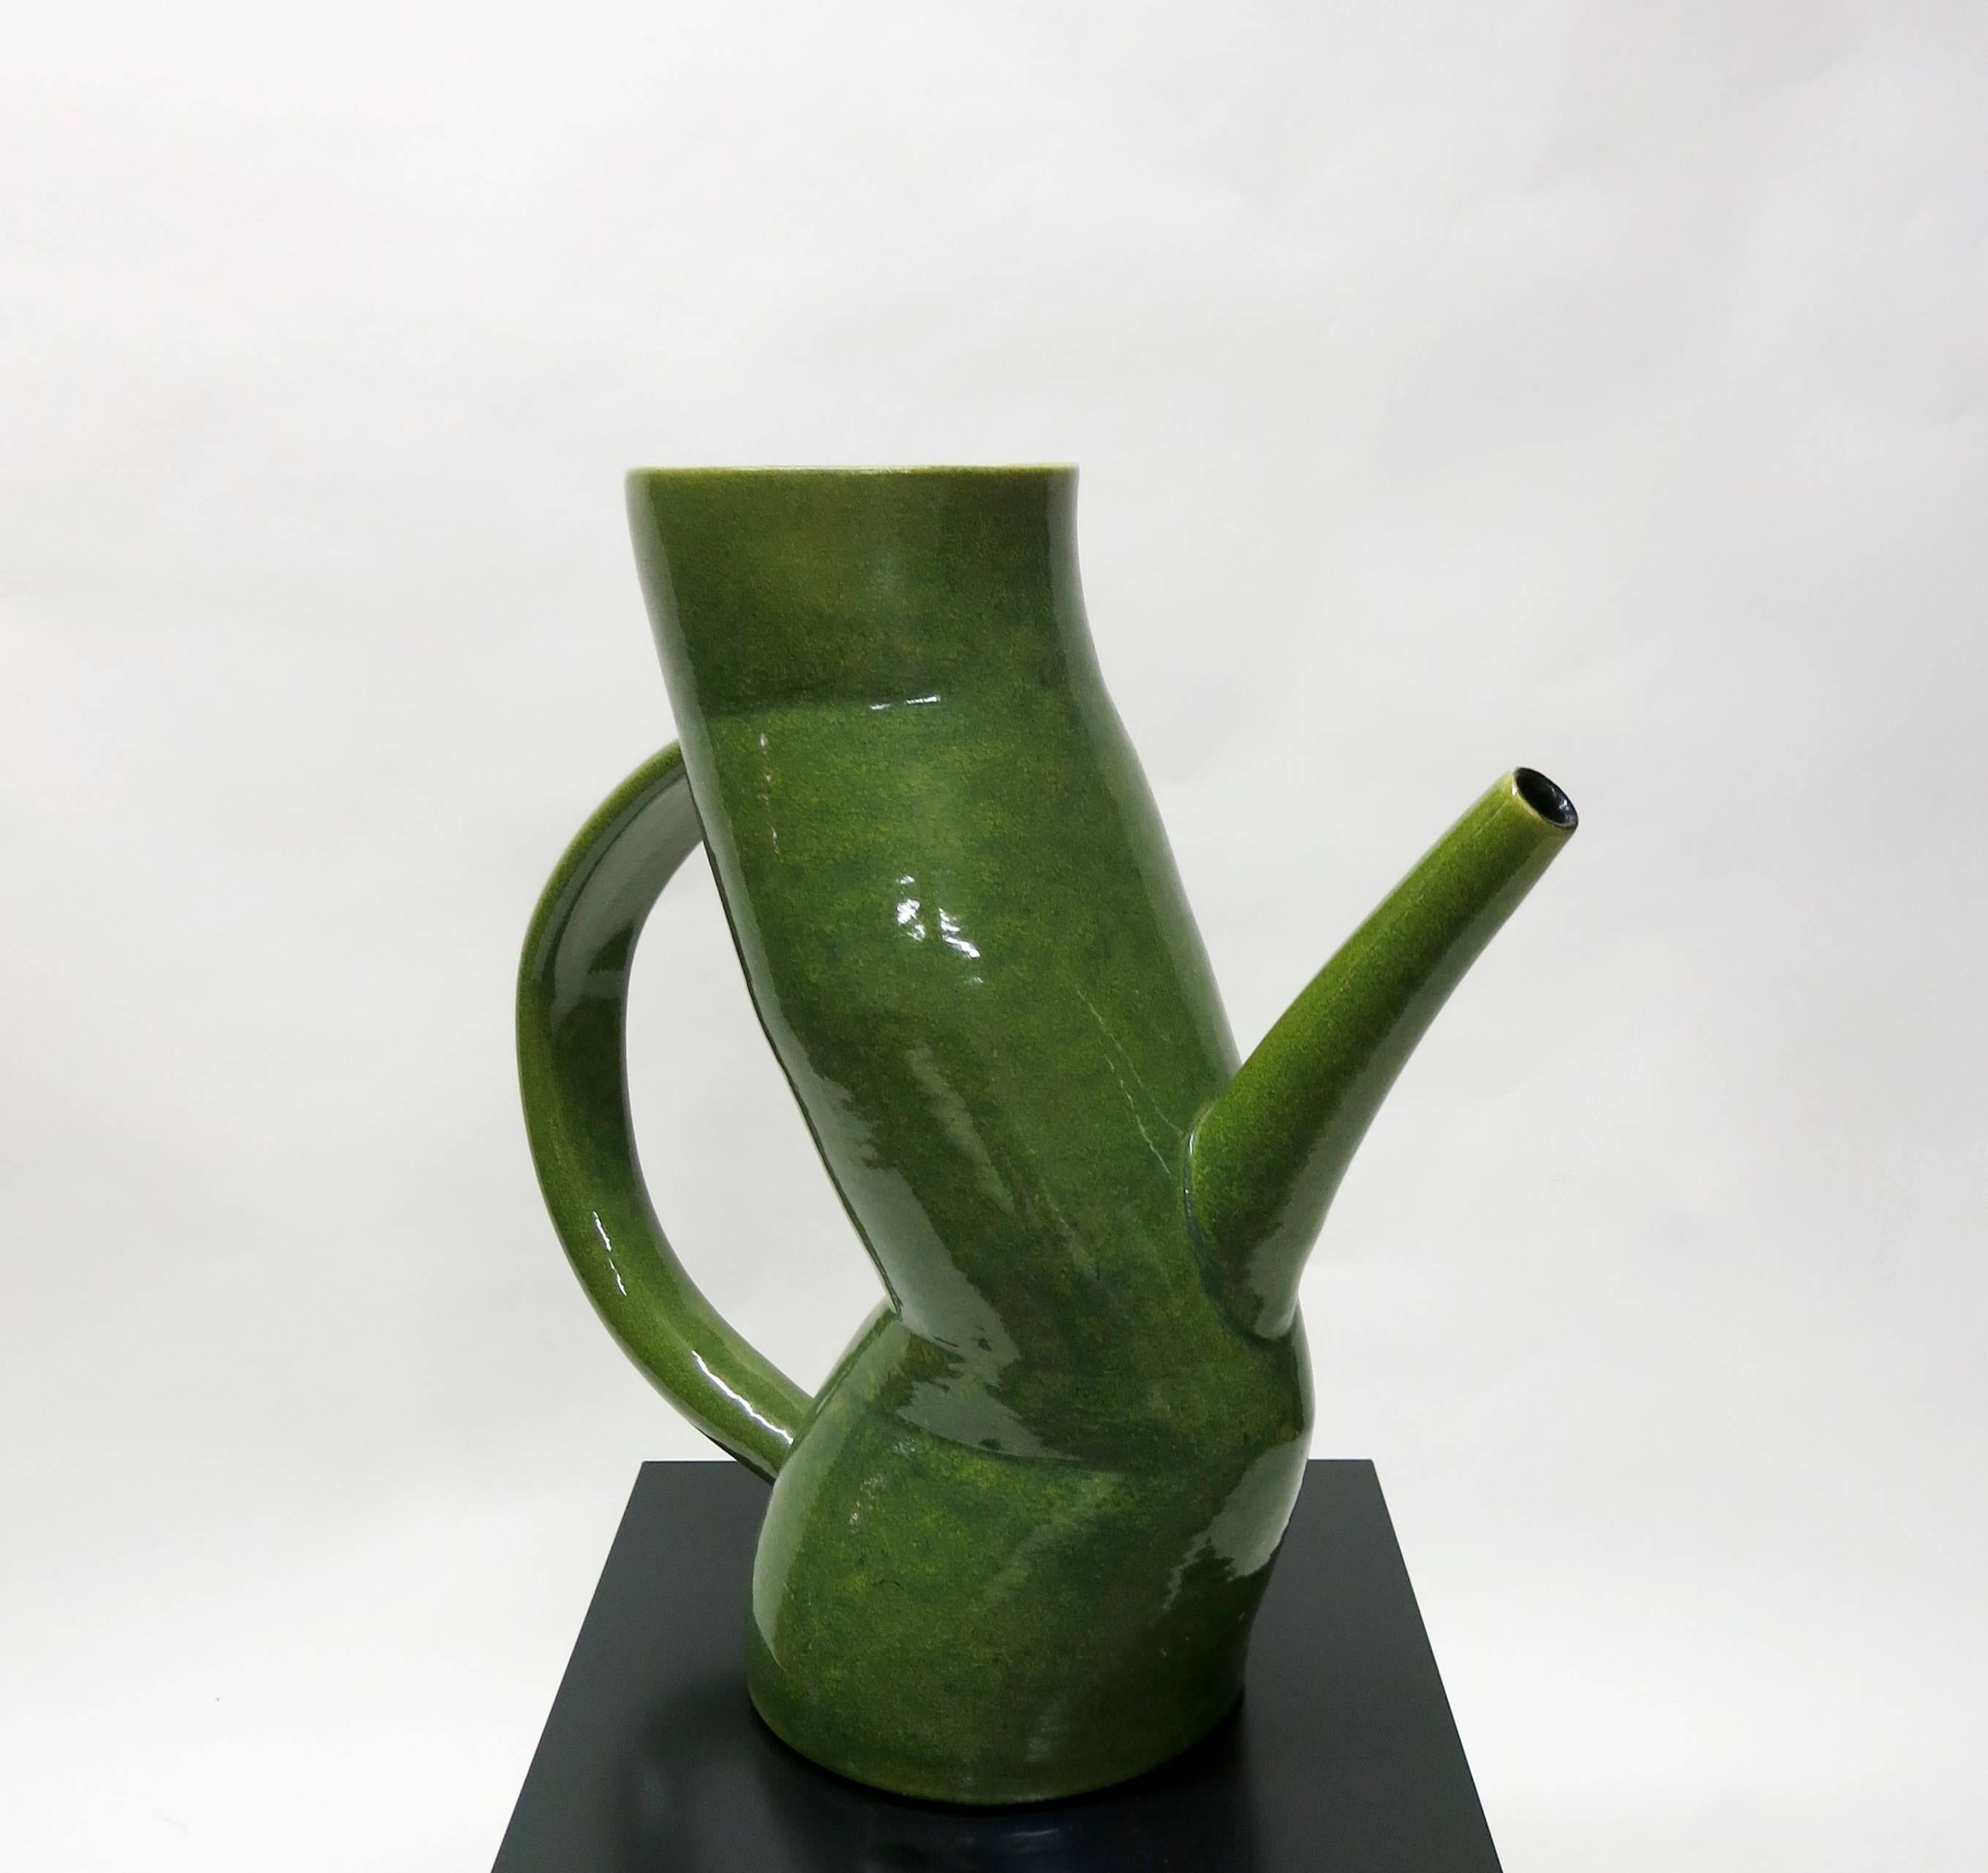 Large pitcher of green and yellow/light green, glazed ceramic made by American artist and Professor Jamie Walker in 1994 with a ribbed interior in black and his signature on the bottom. Excellent condition, no chips or damages, and very well made.